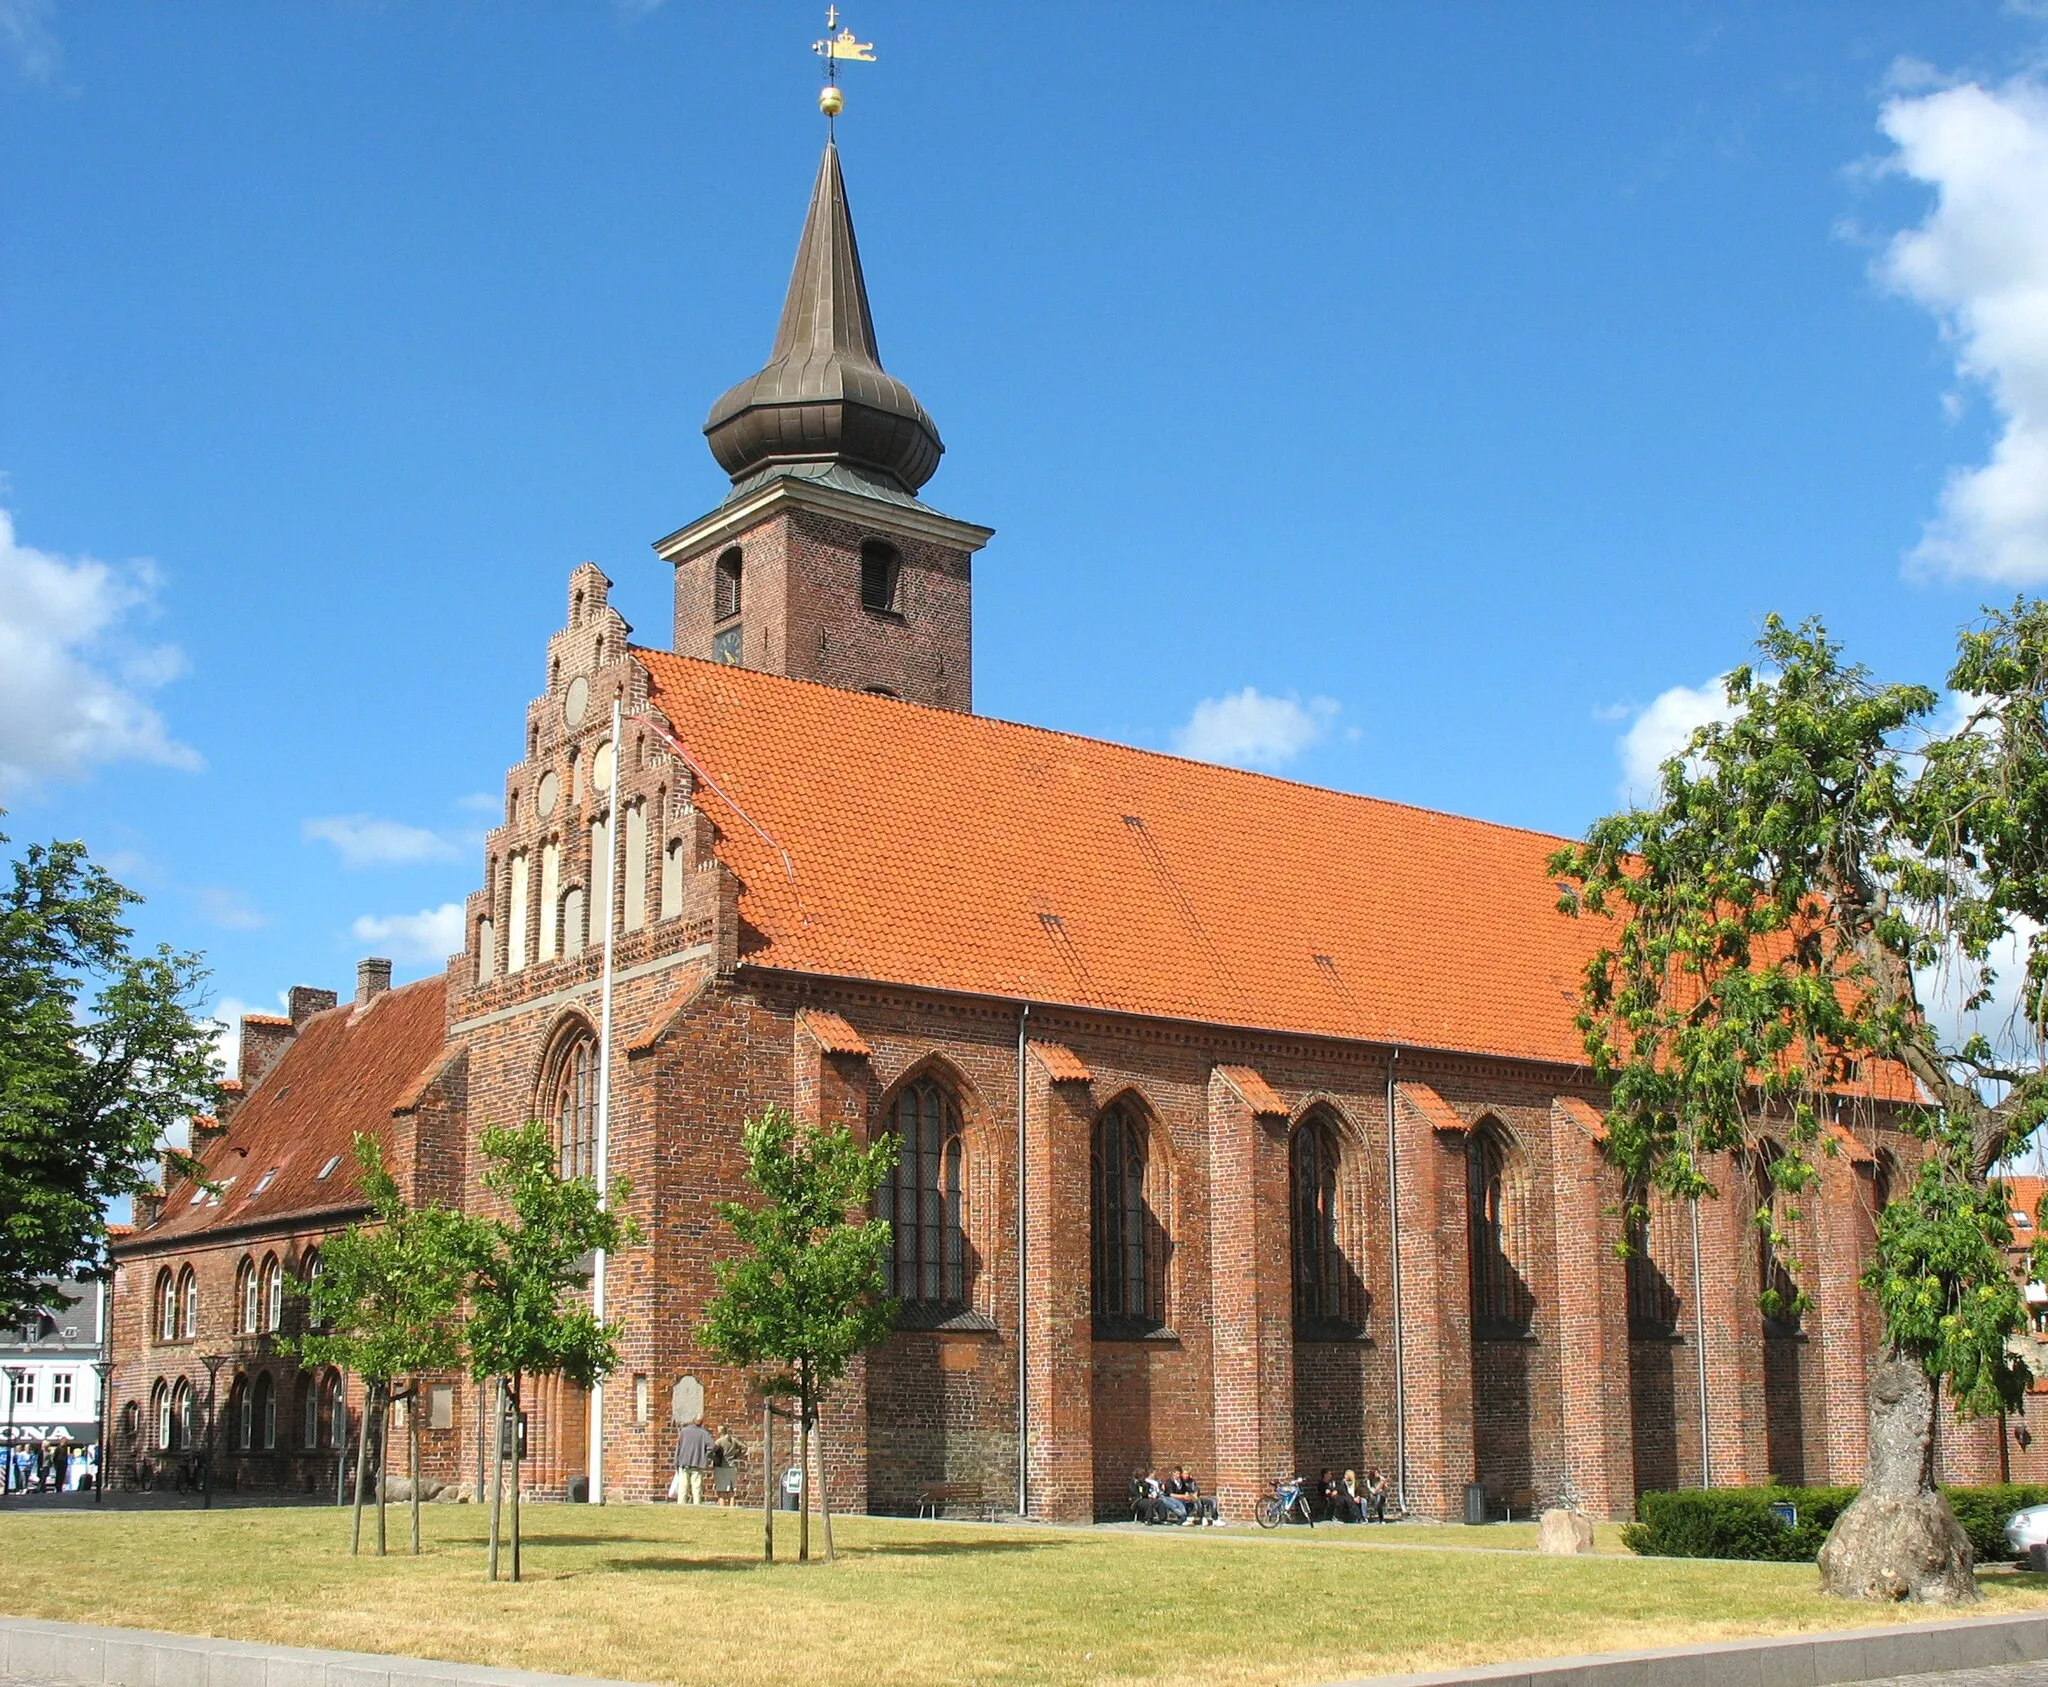 Photo showing: The old abbey church "Klosterkirken" in the town "Nykøbing Falster". It is located on the island Falster in east Denmark.